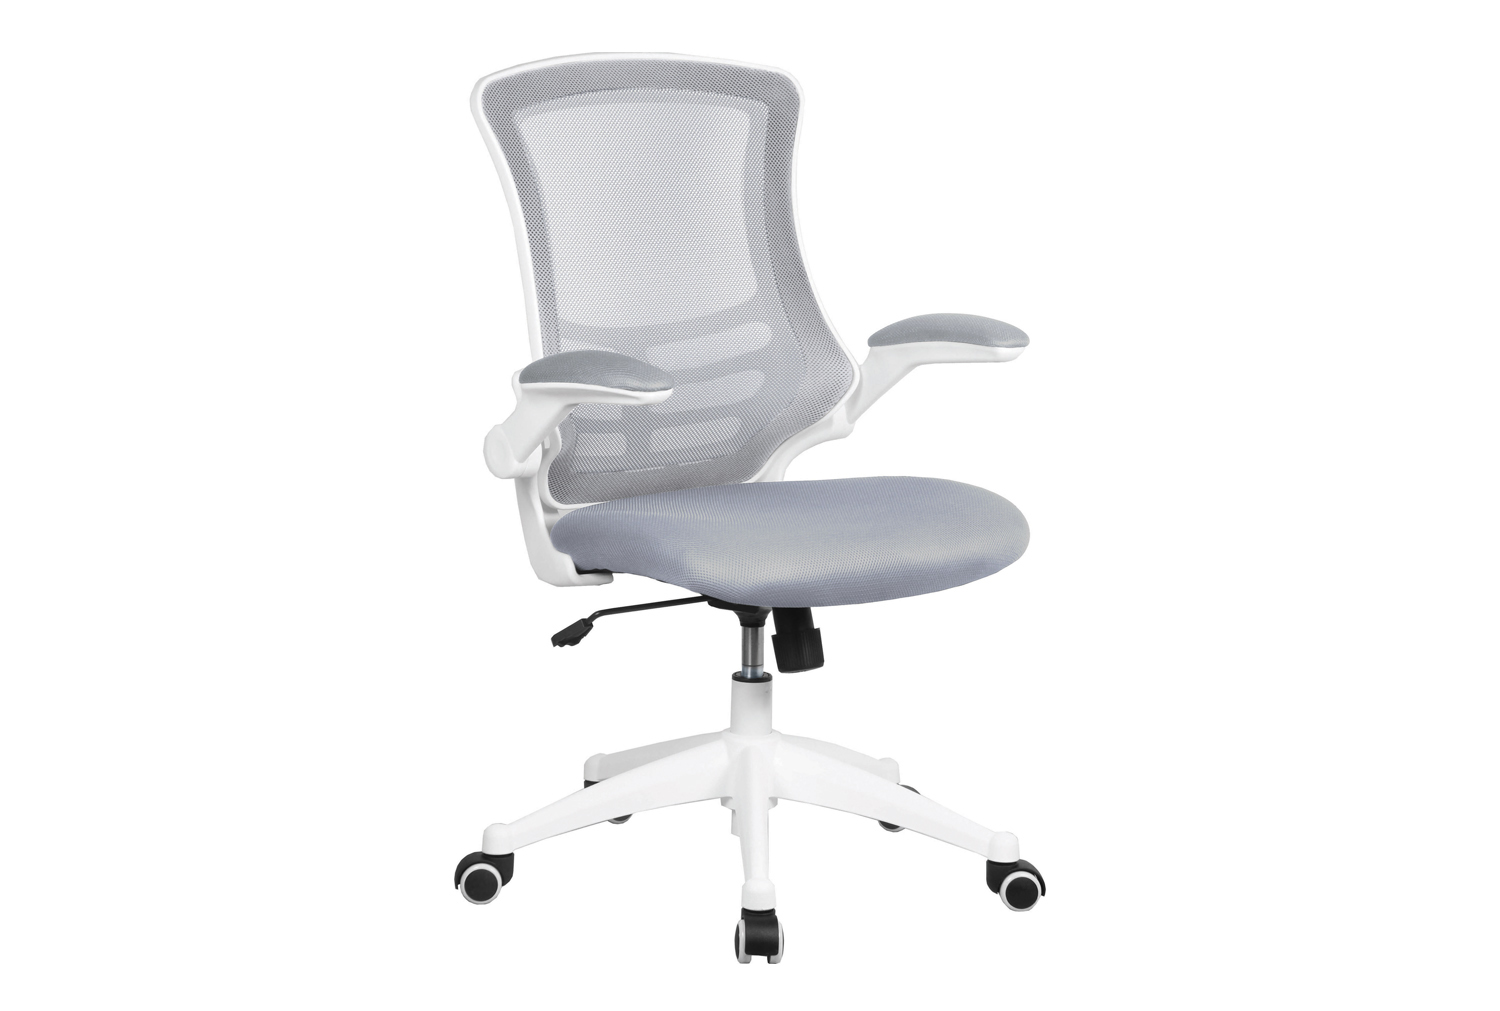 Moon High Mesh Back Operator Office Chair With White Base (Grey), Fully Installed